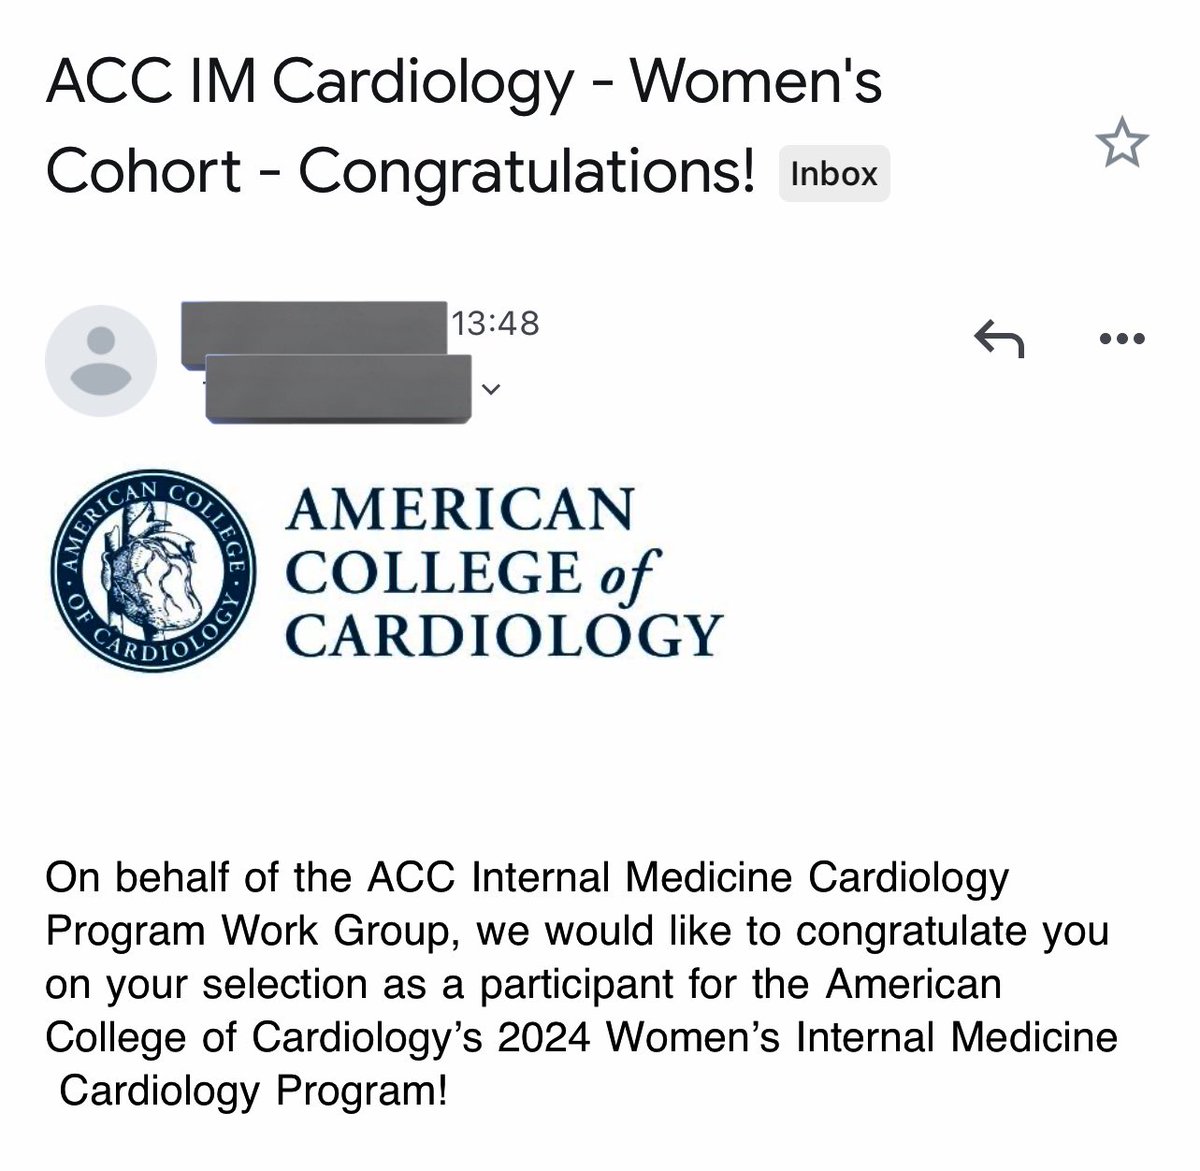 So thrilled to be accepted on the ACC IM Cardiology program! 🫀 excited for what’s coming! Thank you @ACCinTouch